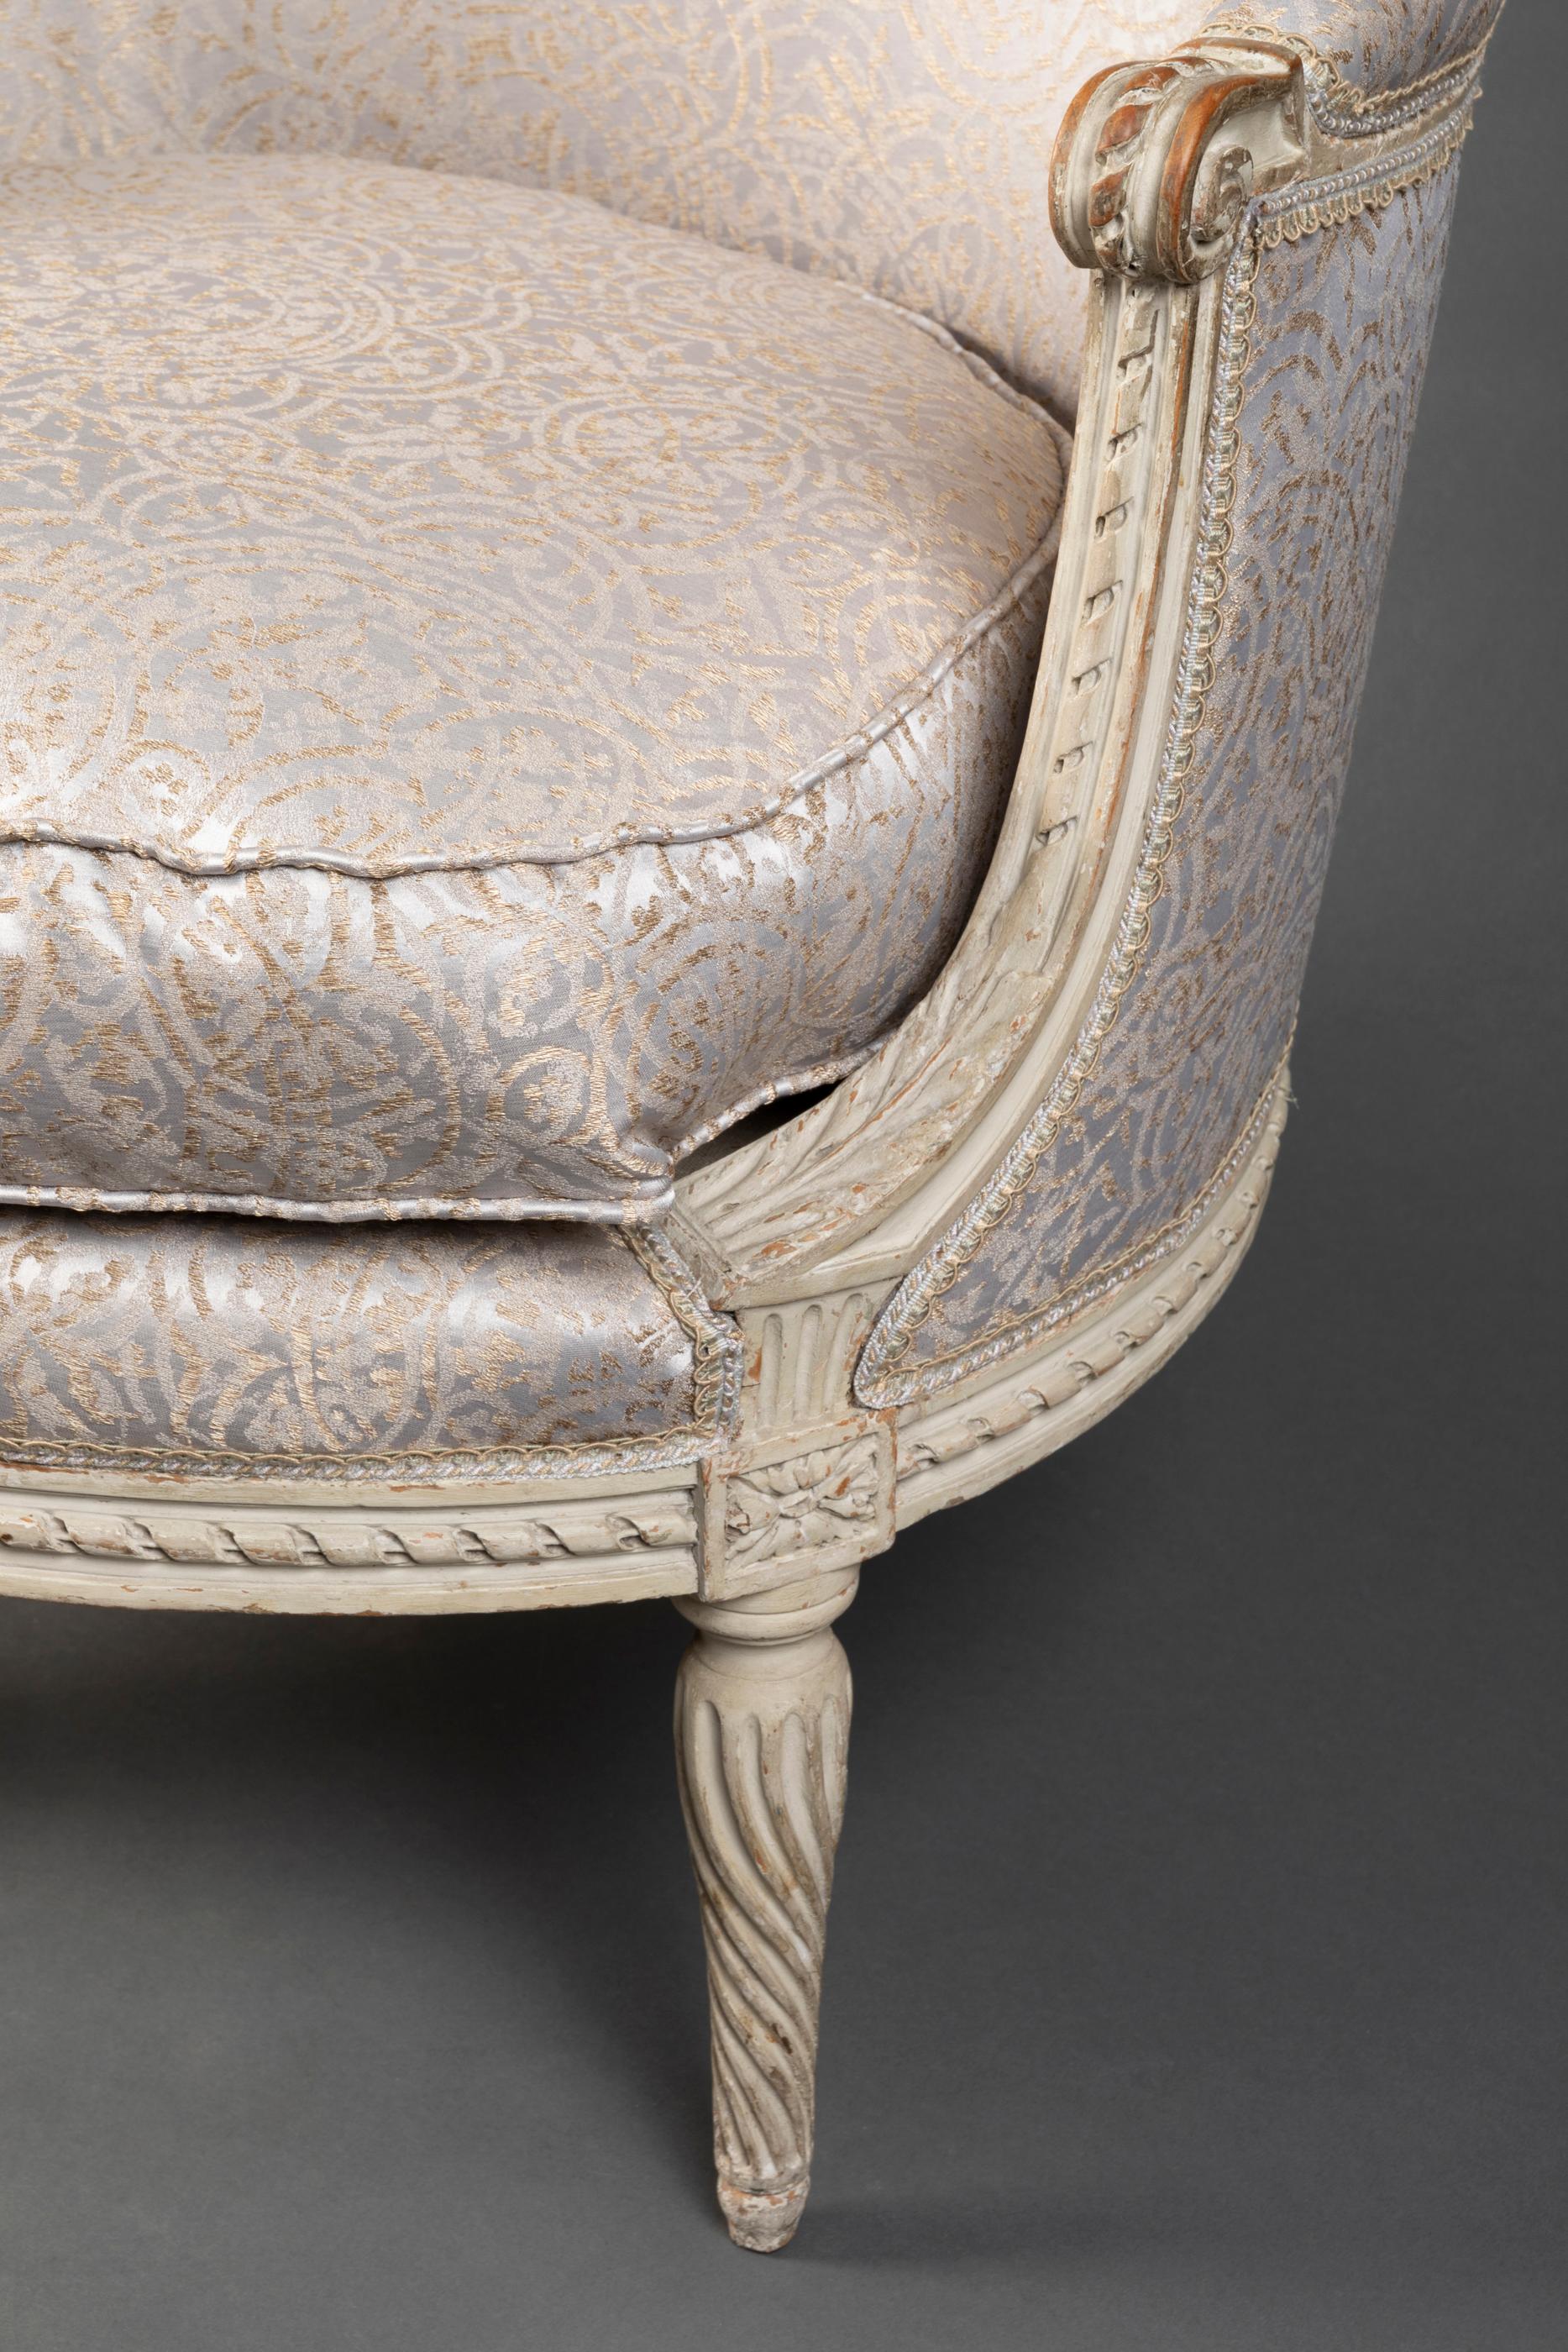 Pair of Bergère Chairs from the Louis XVI Period Stamped, Delanois, 18th Century For Sale 8